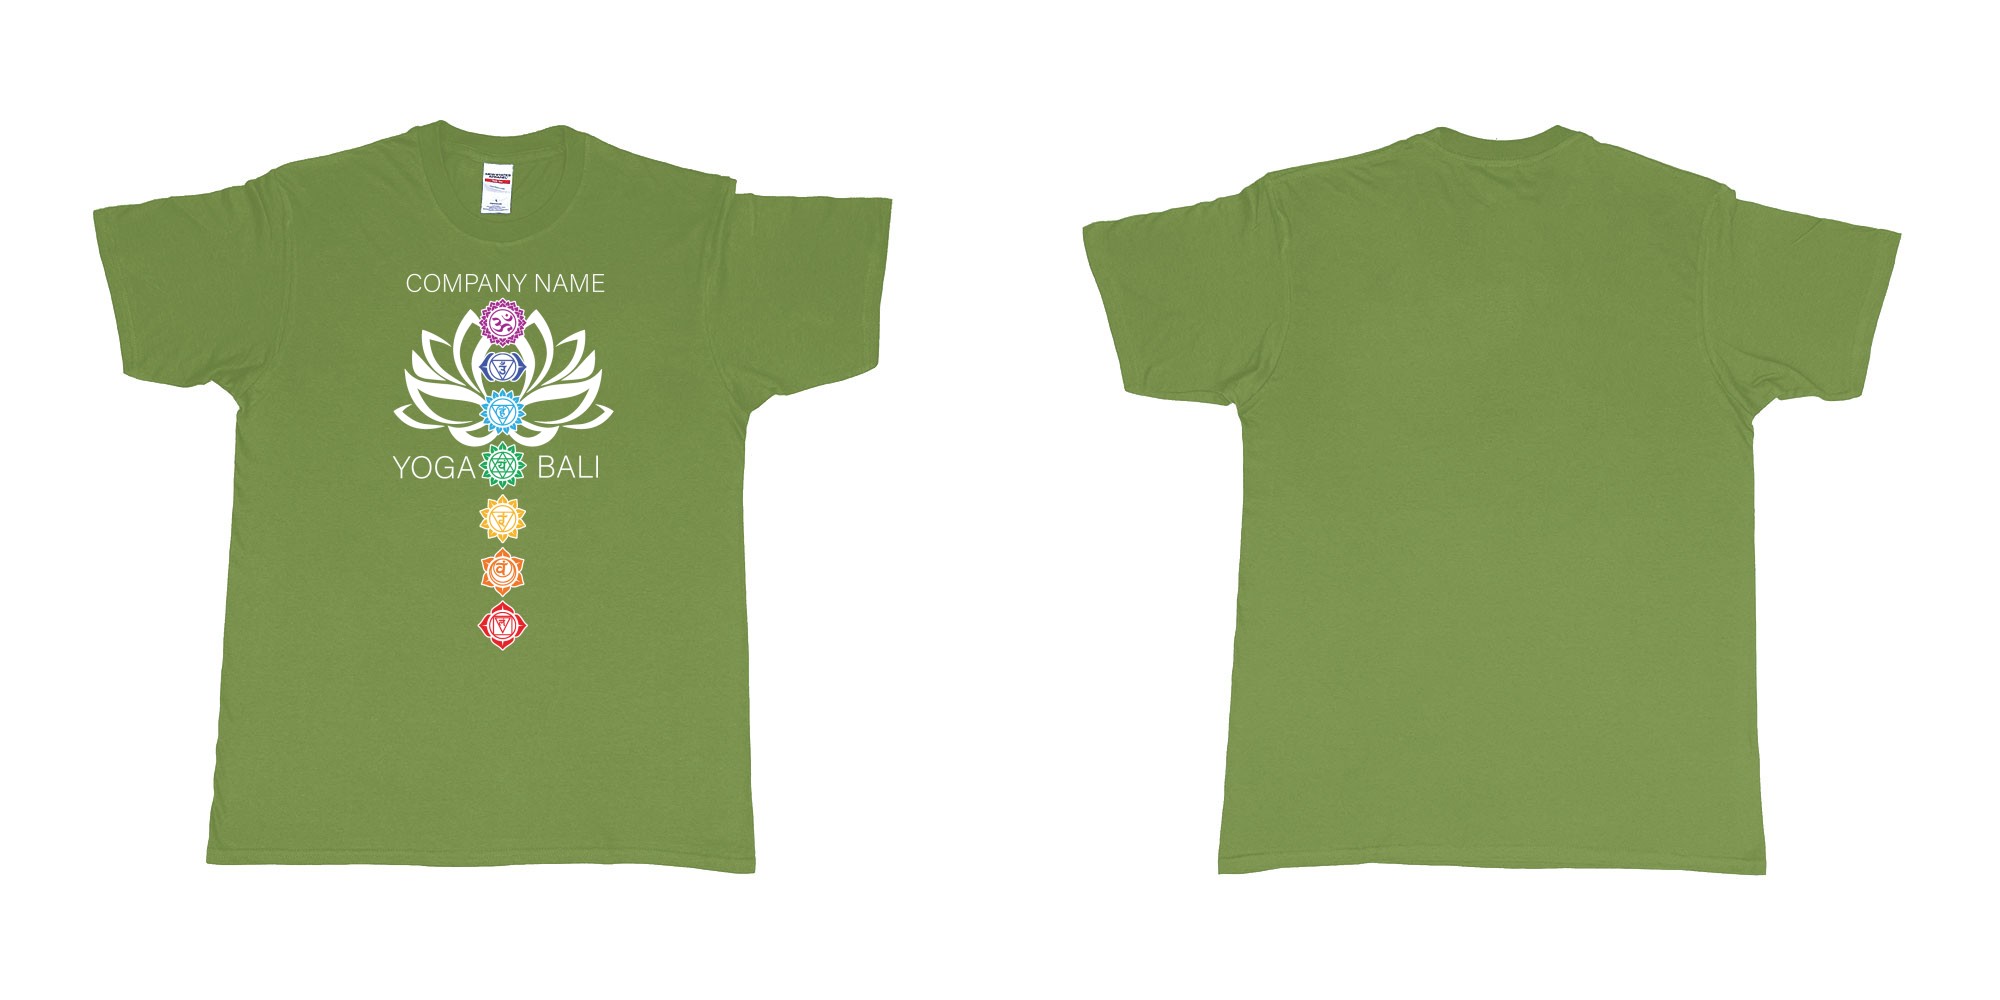 Custom tshirt design lotus flower chakras yoga hindi symbols for custom teeshirt printing in fabric color military-green choice your own text made in Bali by The Pirate Way